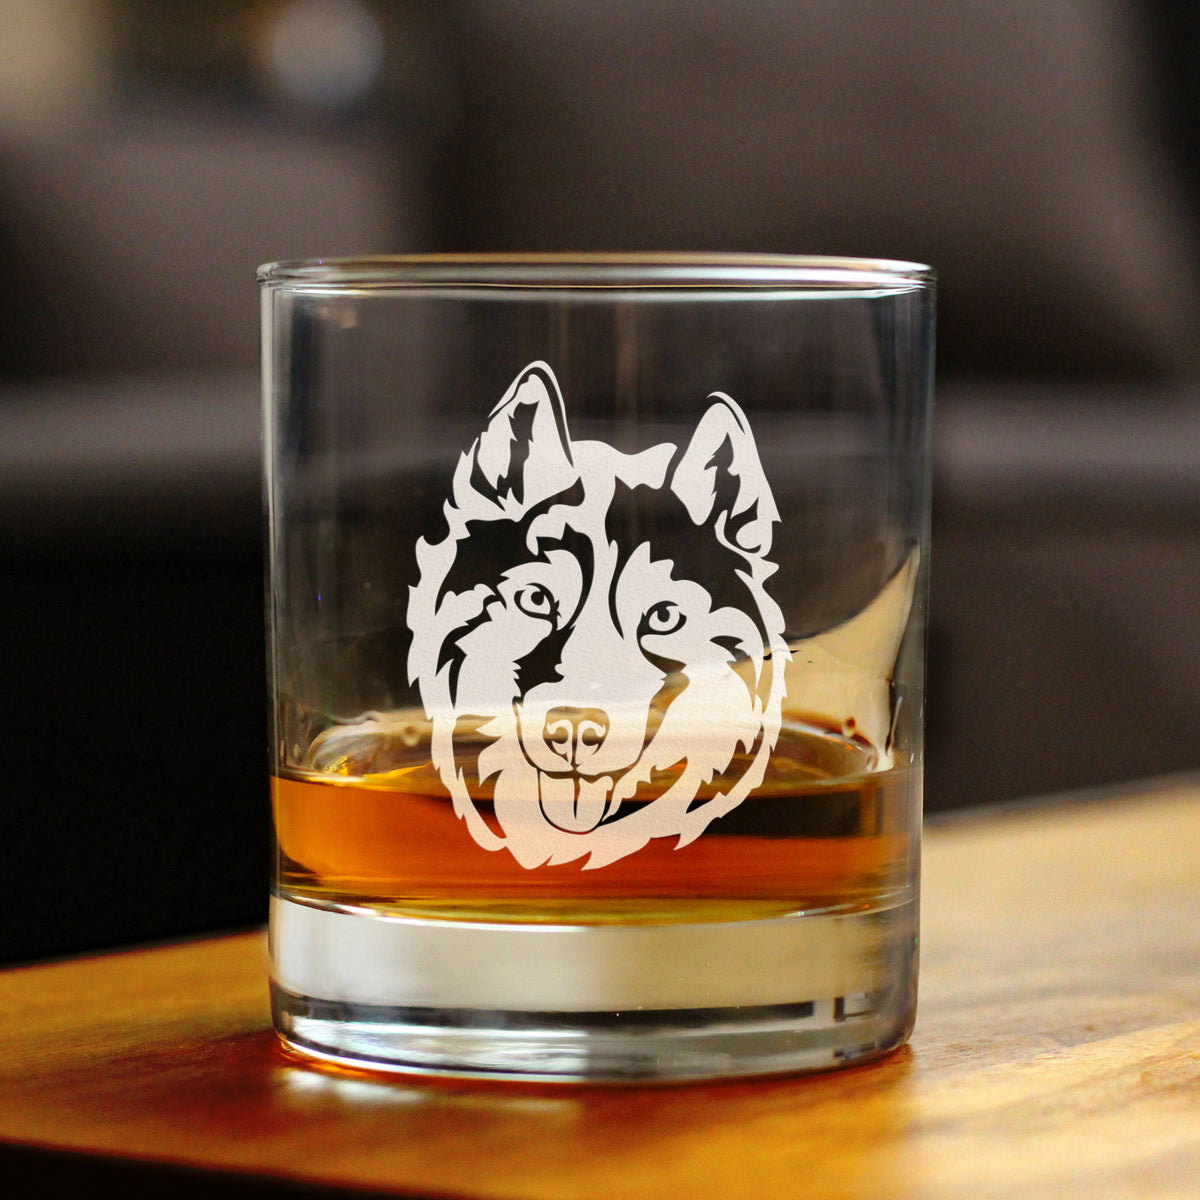 Siberian Husky Face Whiskey Rocks Glass - Unique Dog Themed Decor and Gifts for Moms &amp; Dads of Huskies - 10.25 Oz